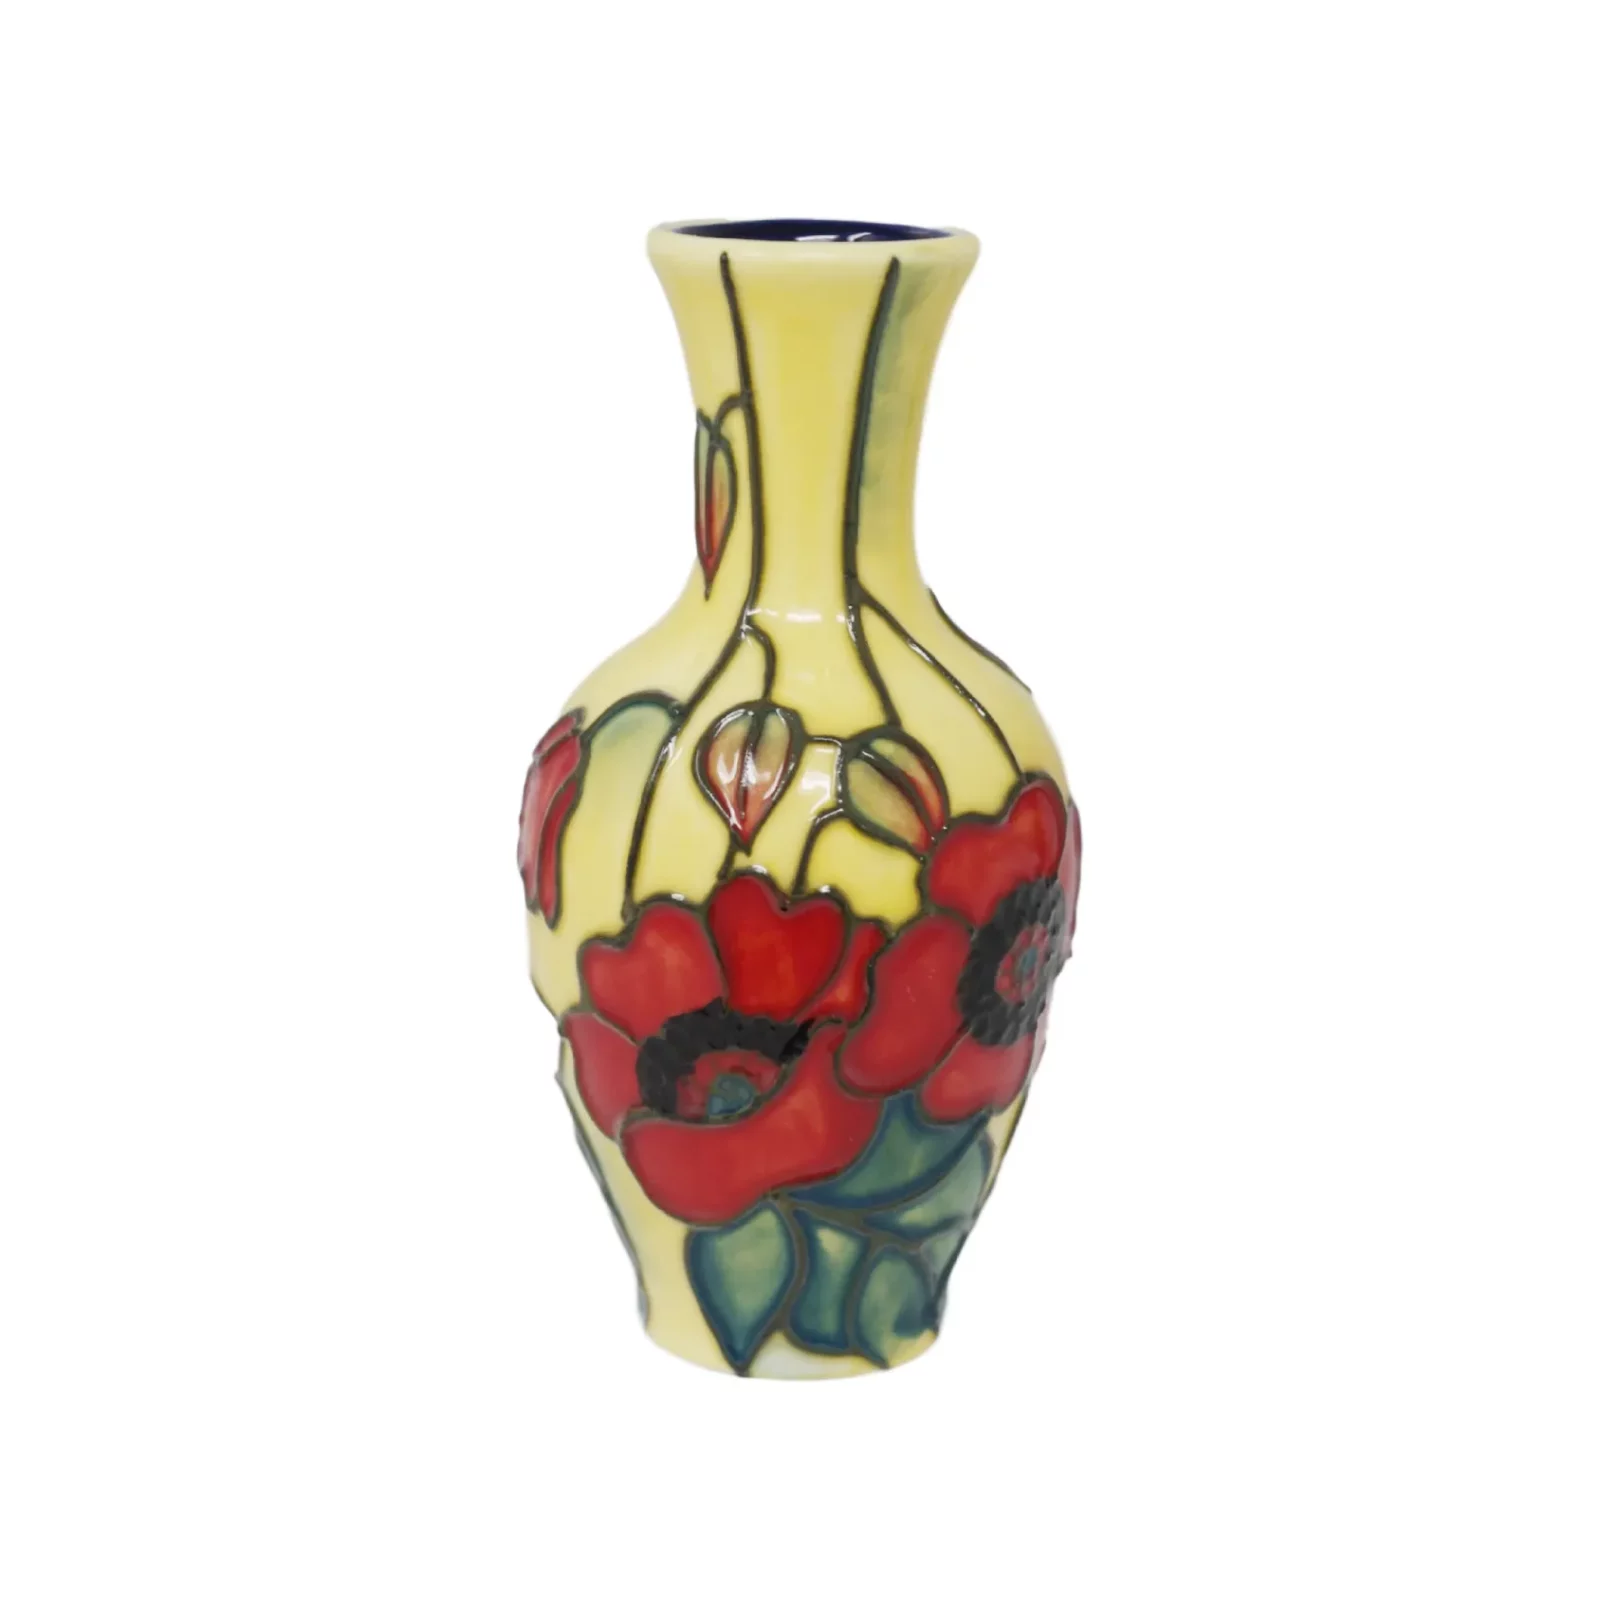 Cute vase with red poppy flowers on all sides hand painted and tube lined pottery